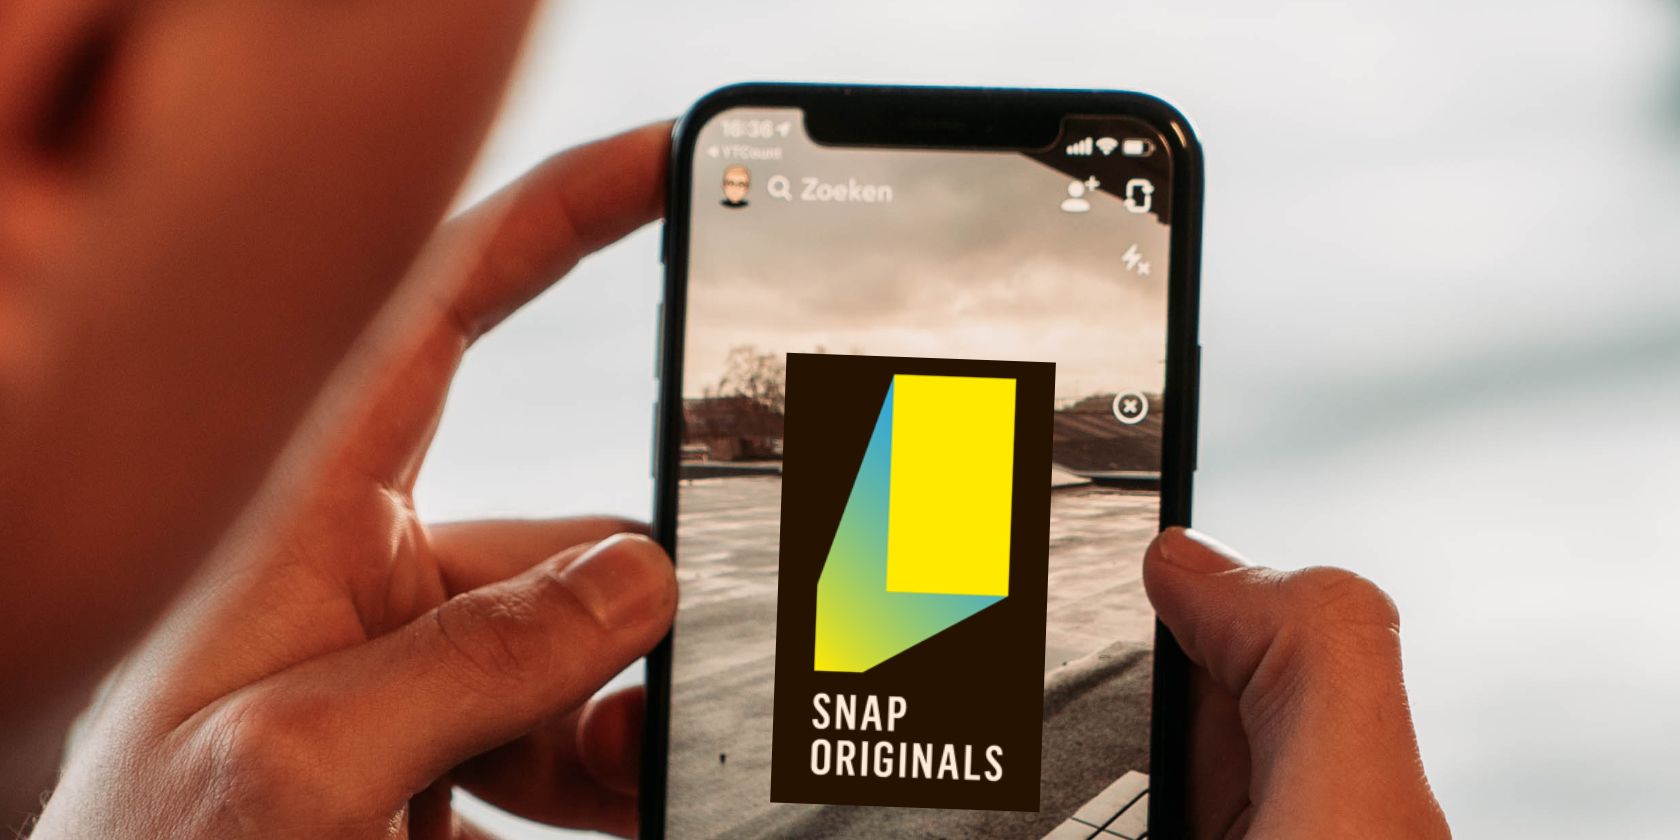 A close-up of a phone using Snapchat with the Snap Originals logo on the display